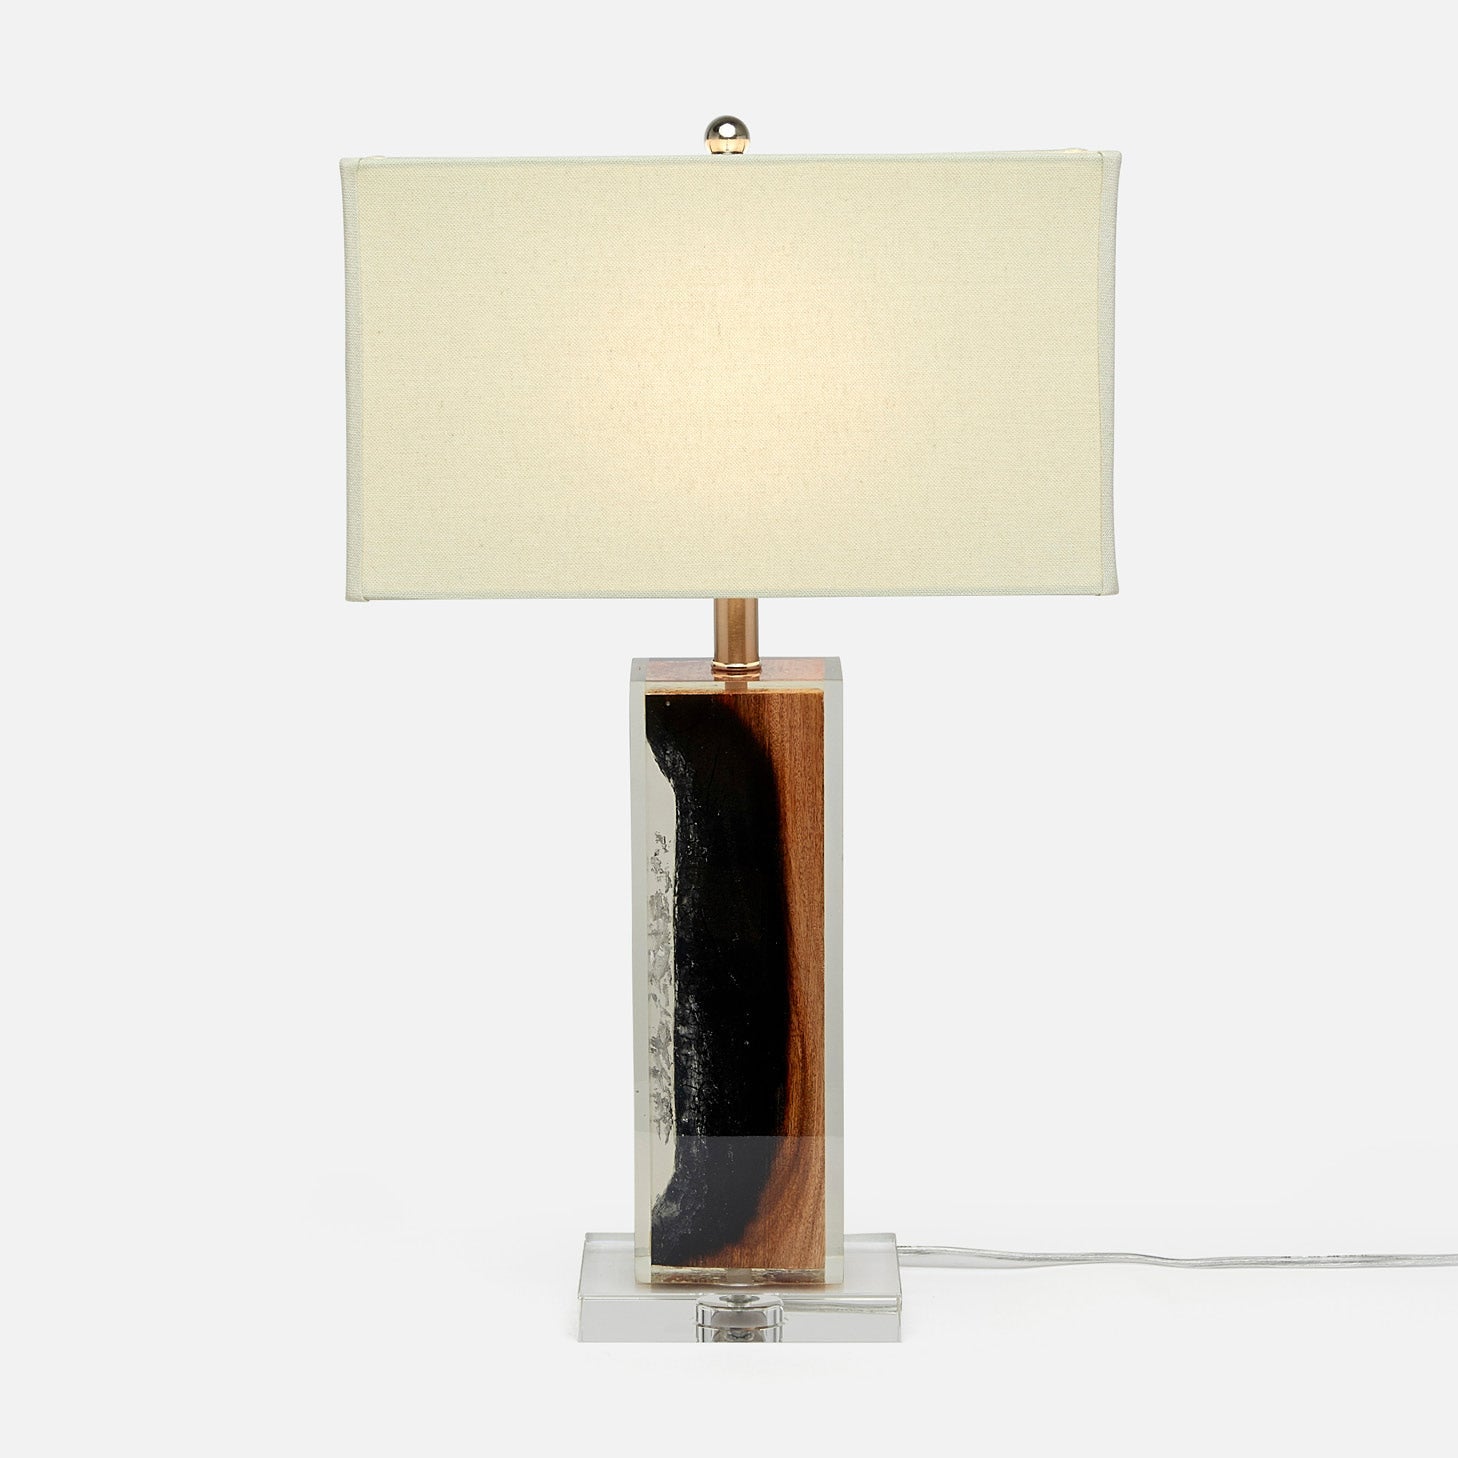 Looking for a Unique Accent Lamp? Check out These Organic Resin